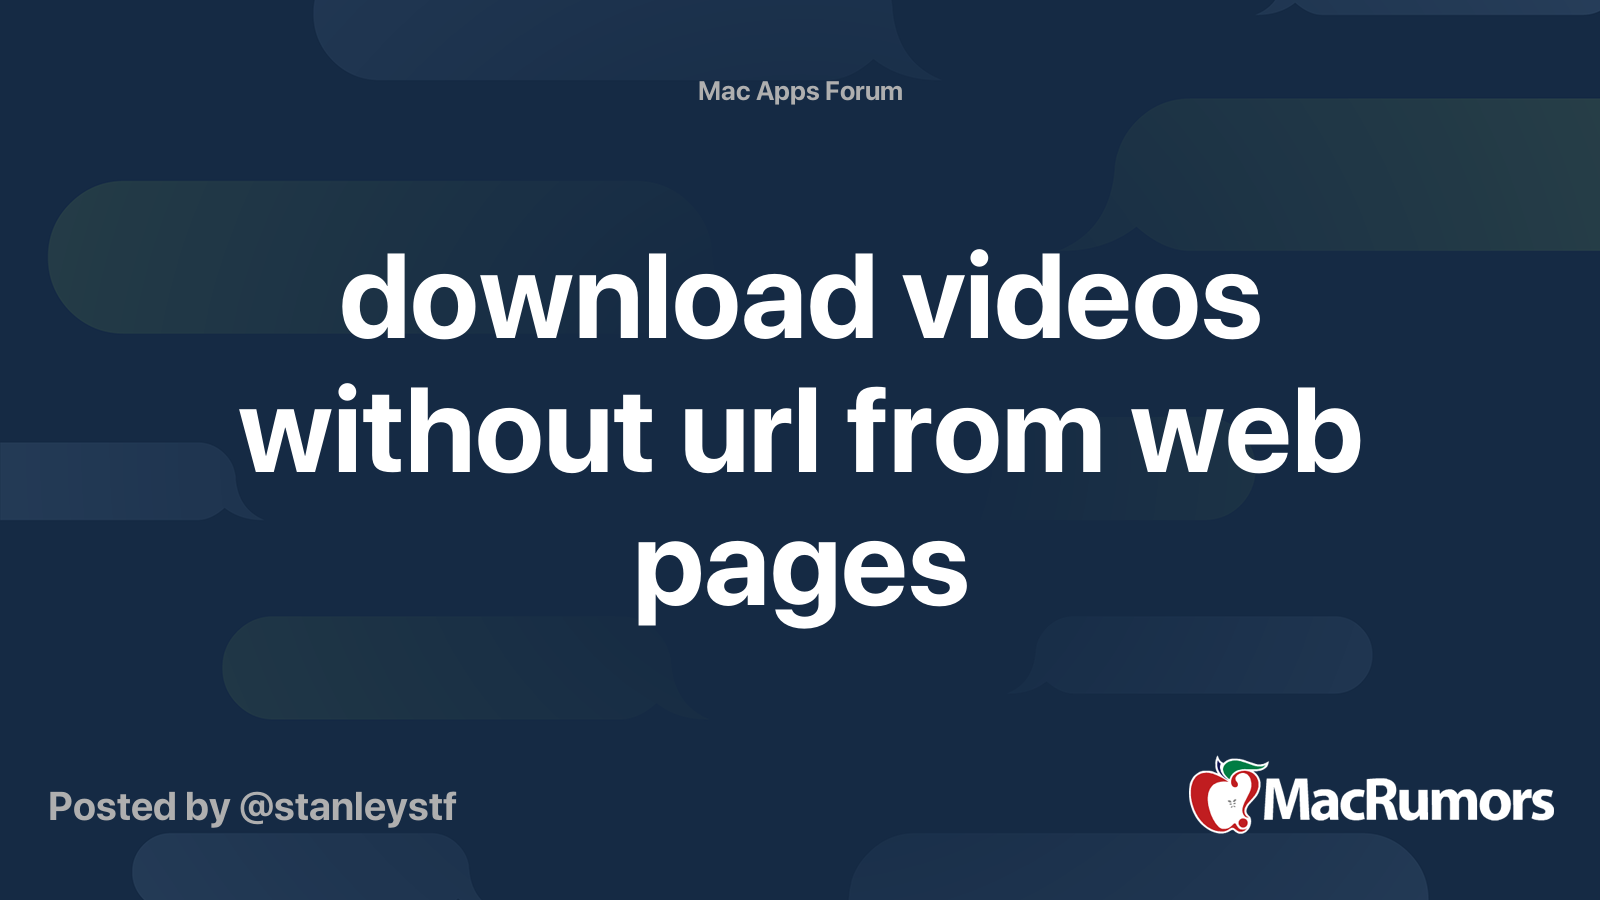 How can I download a video from a website without URL?